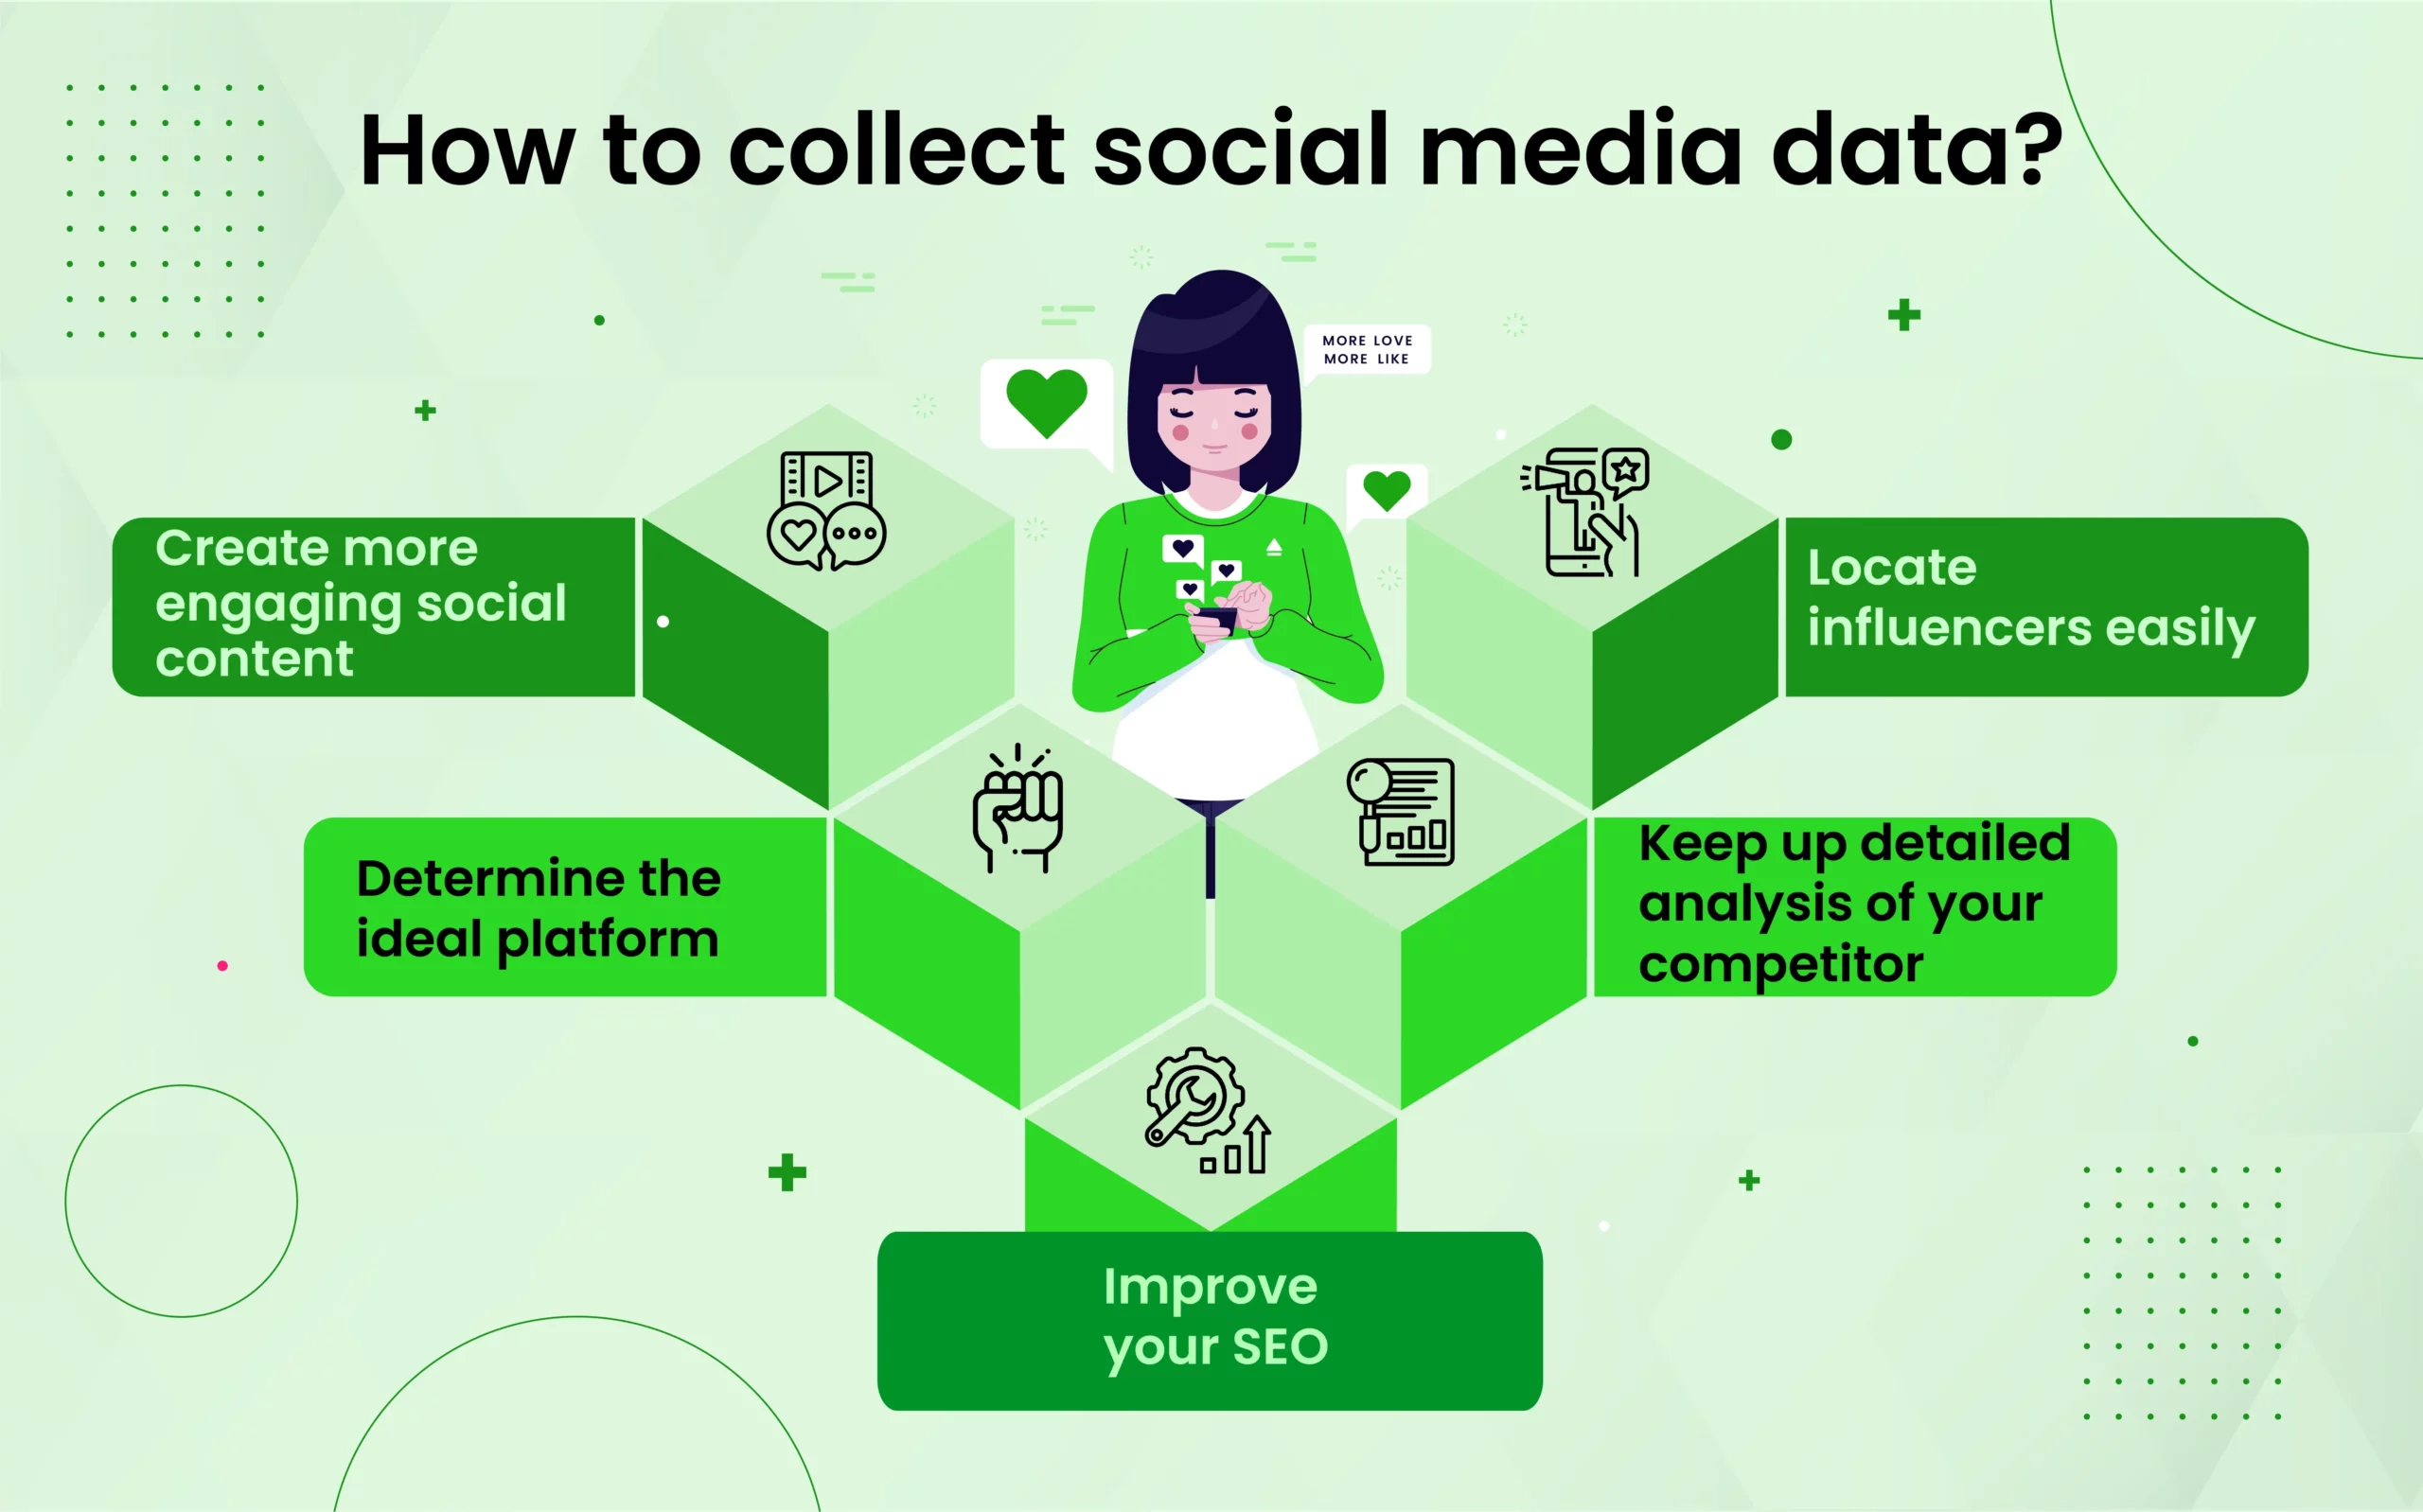 How to collect social media data